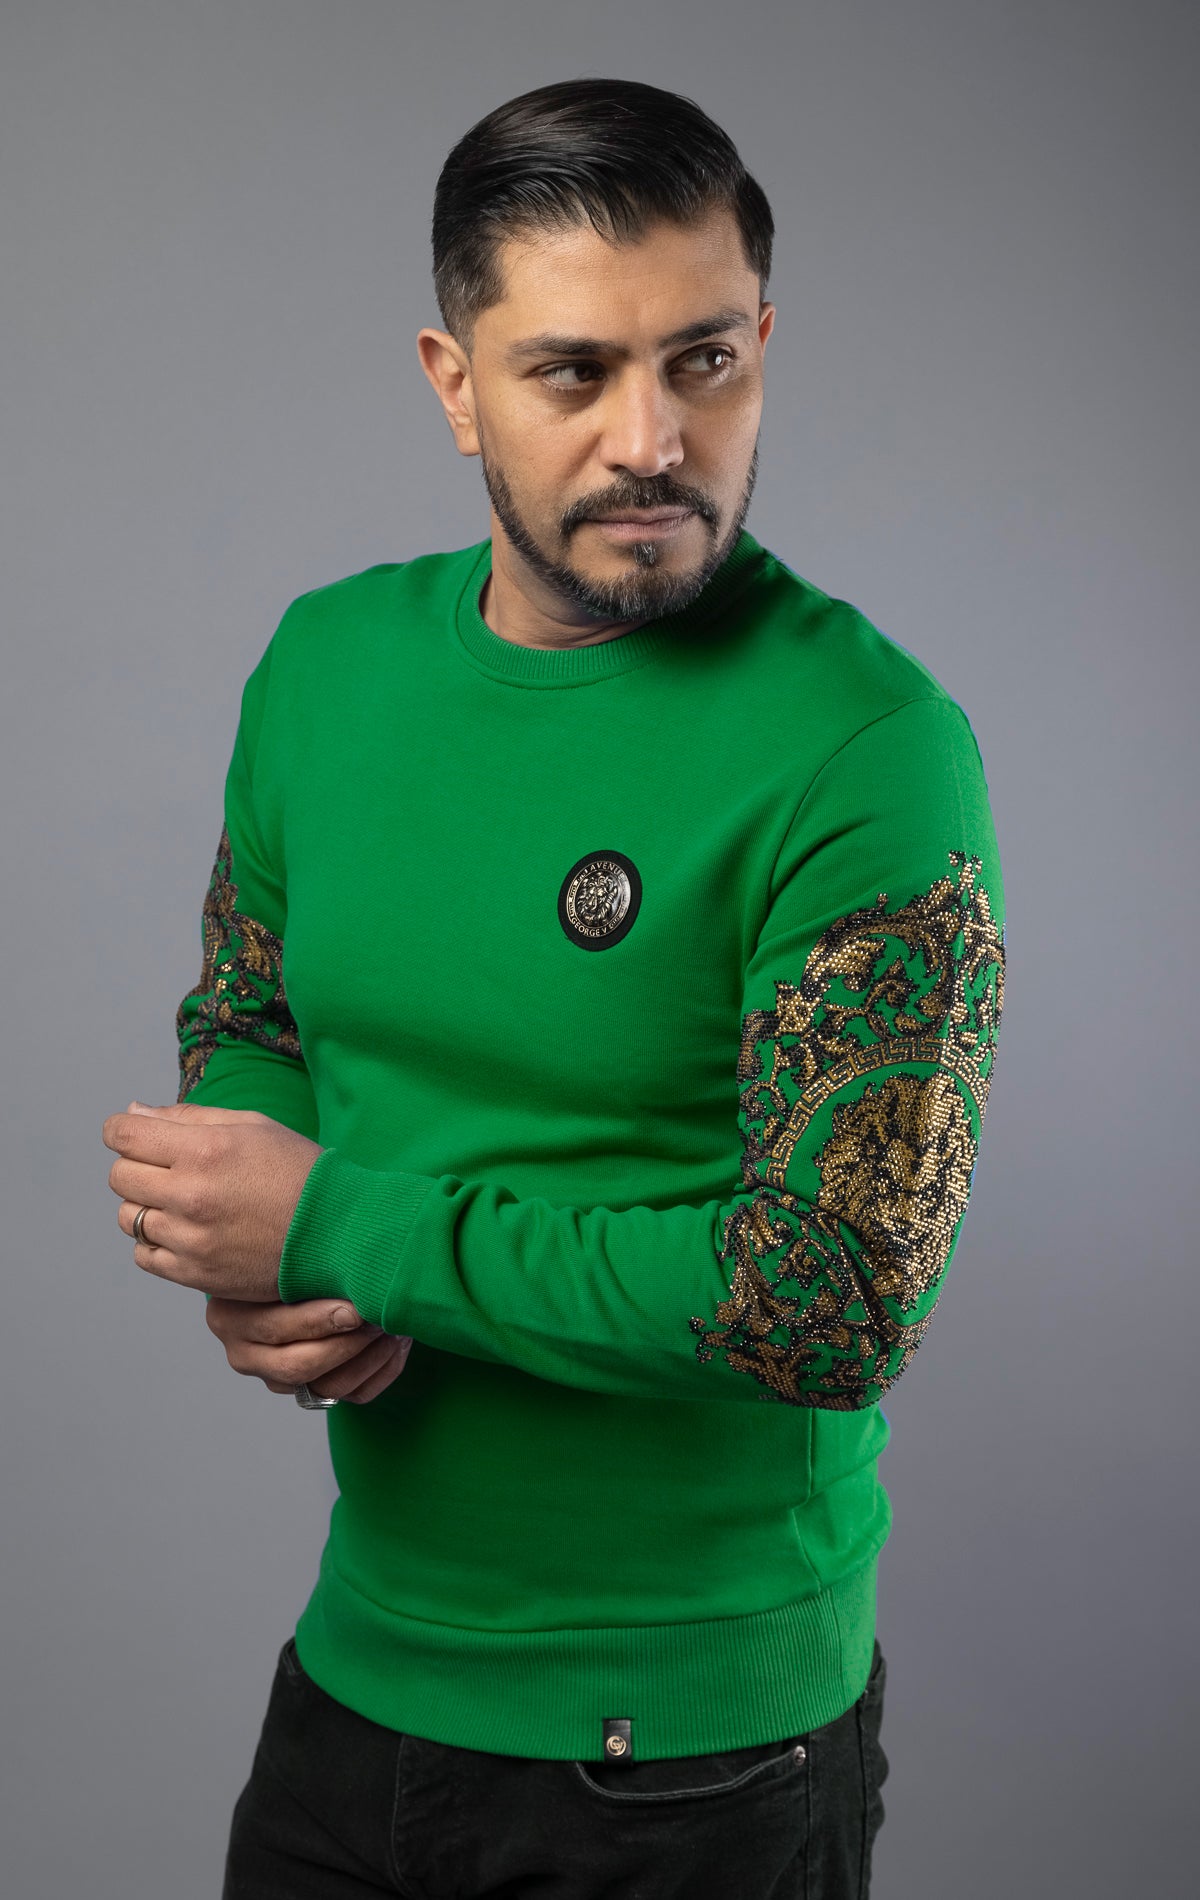 Green Soft and comfortable GV sweater with round-neck, long sleeves, and a Lion pin. The gold sleeves add a touch of elegance, making it suitable for daily wear. Made with soft cotton for ultimate comfort.